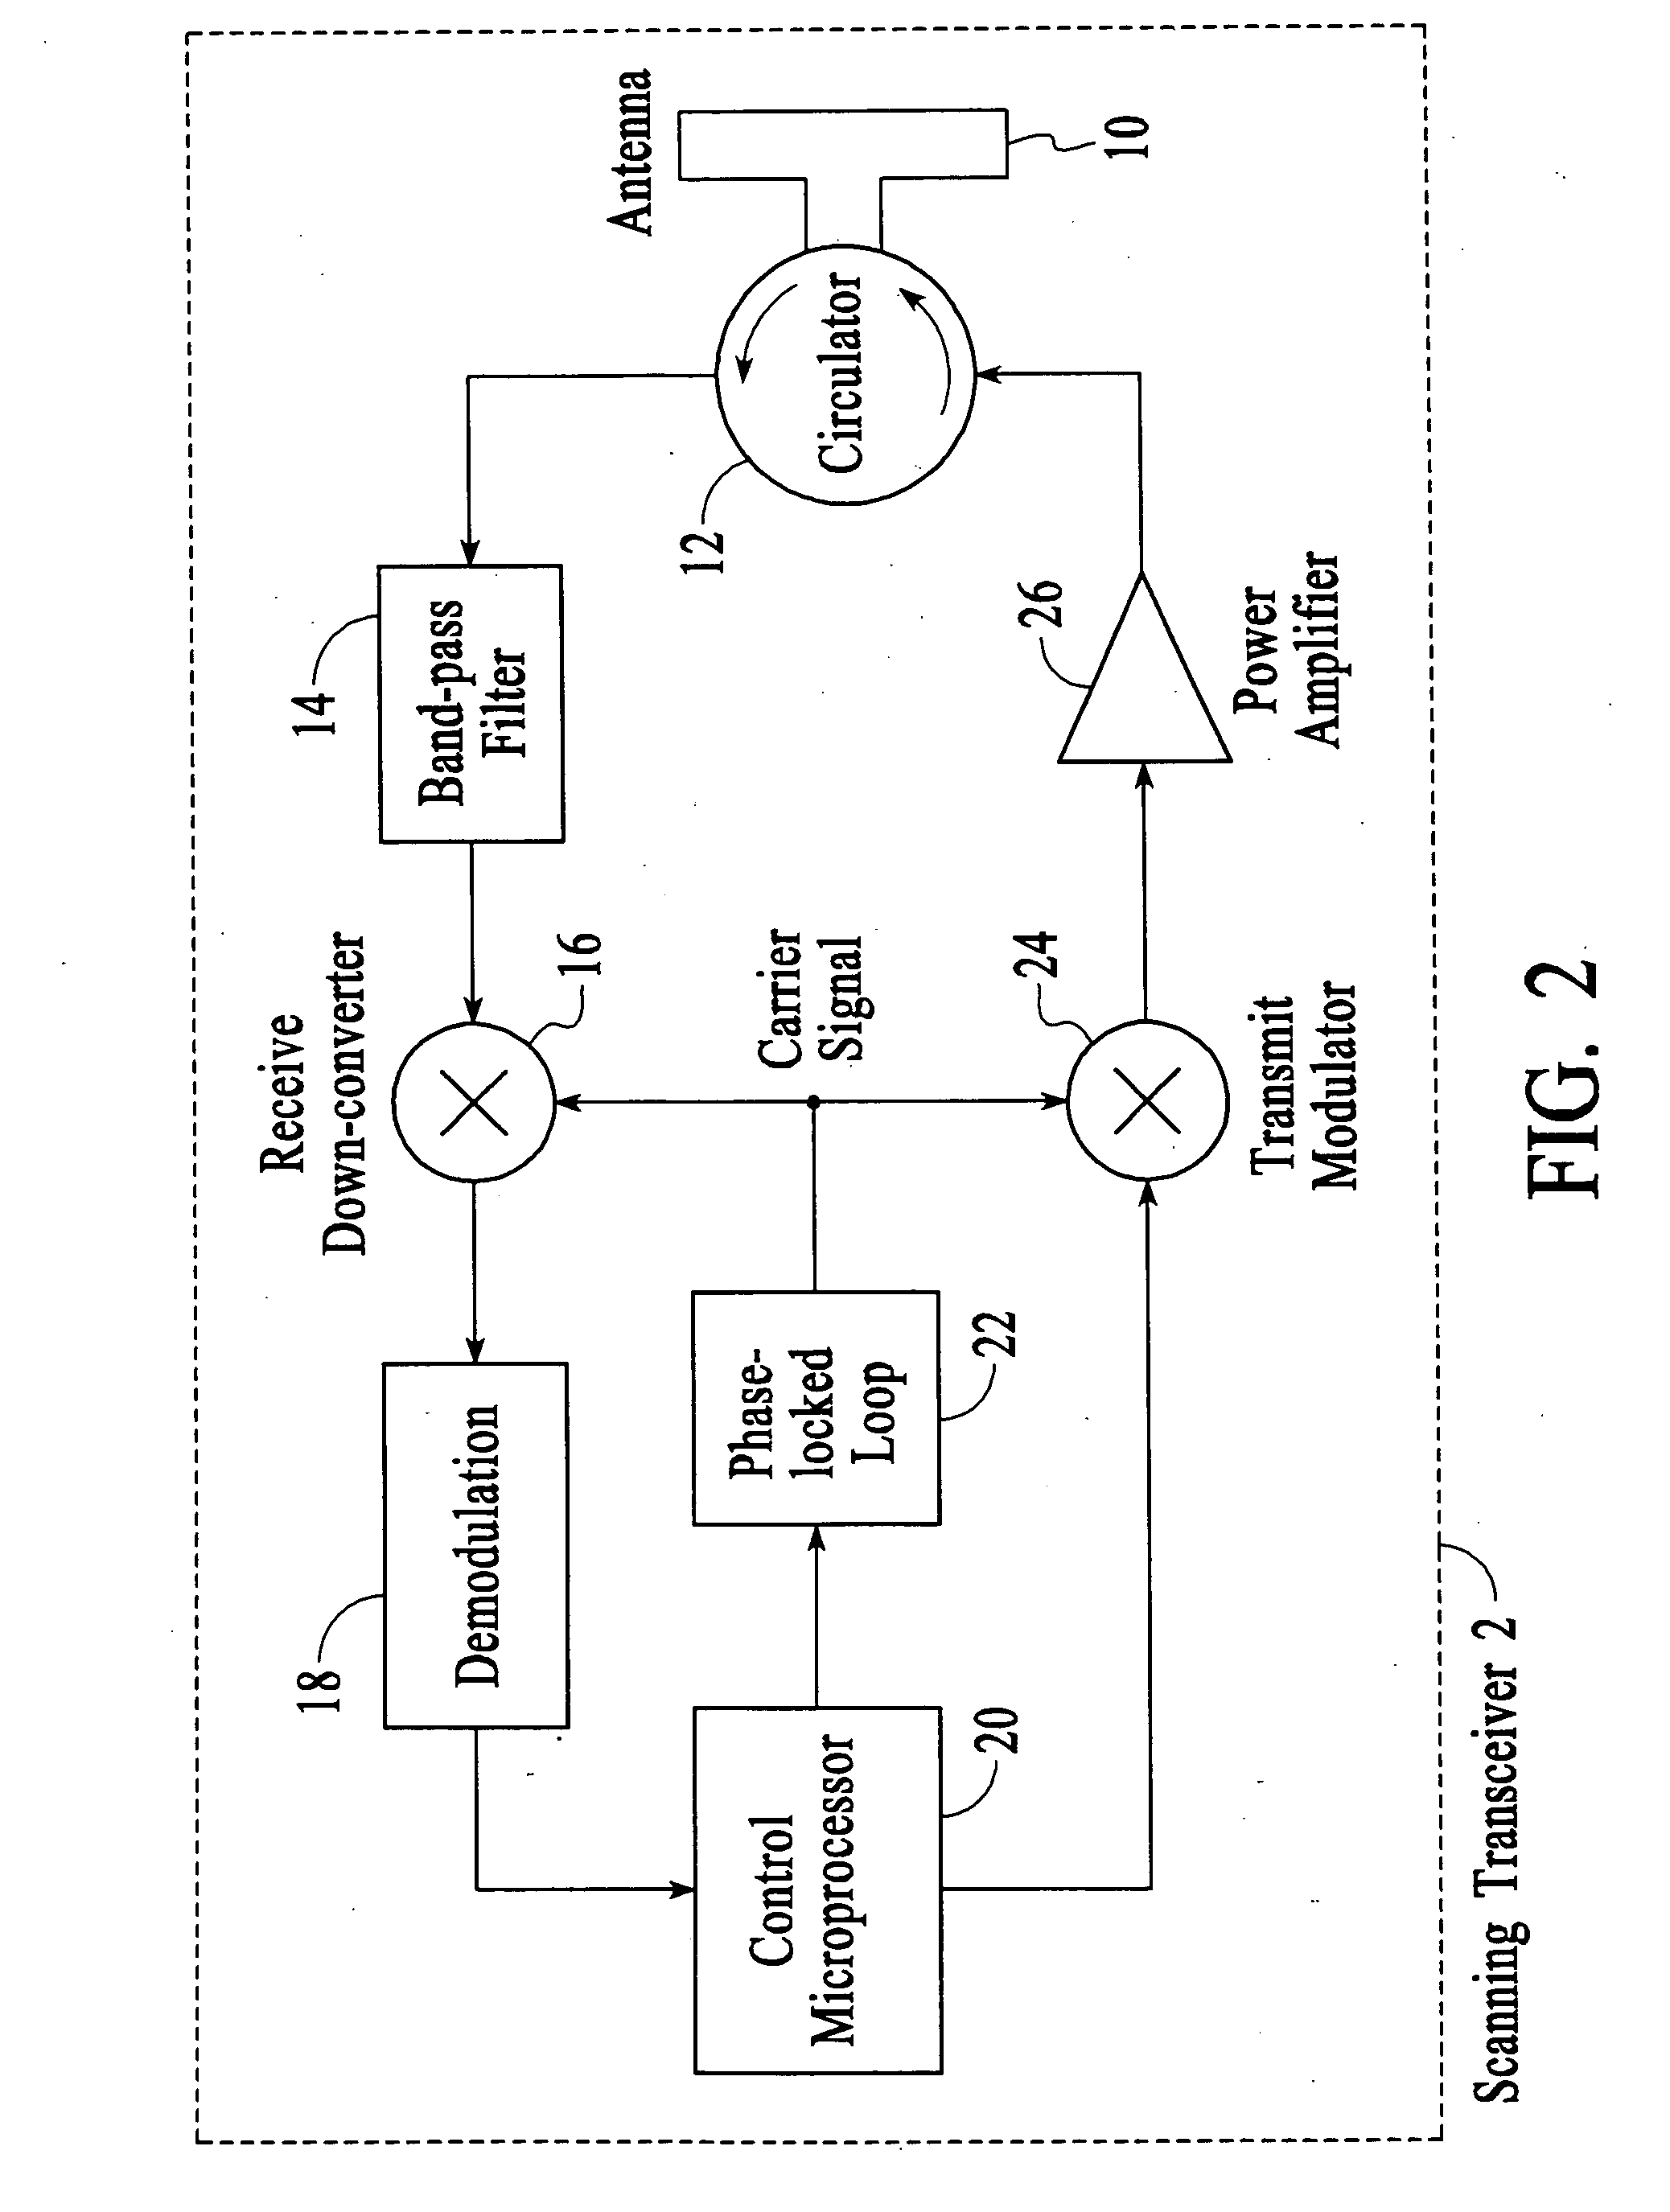 Method for efficiently querying and identifying multiple items on a communication channel